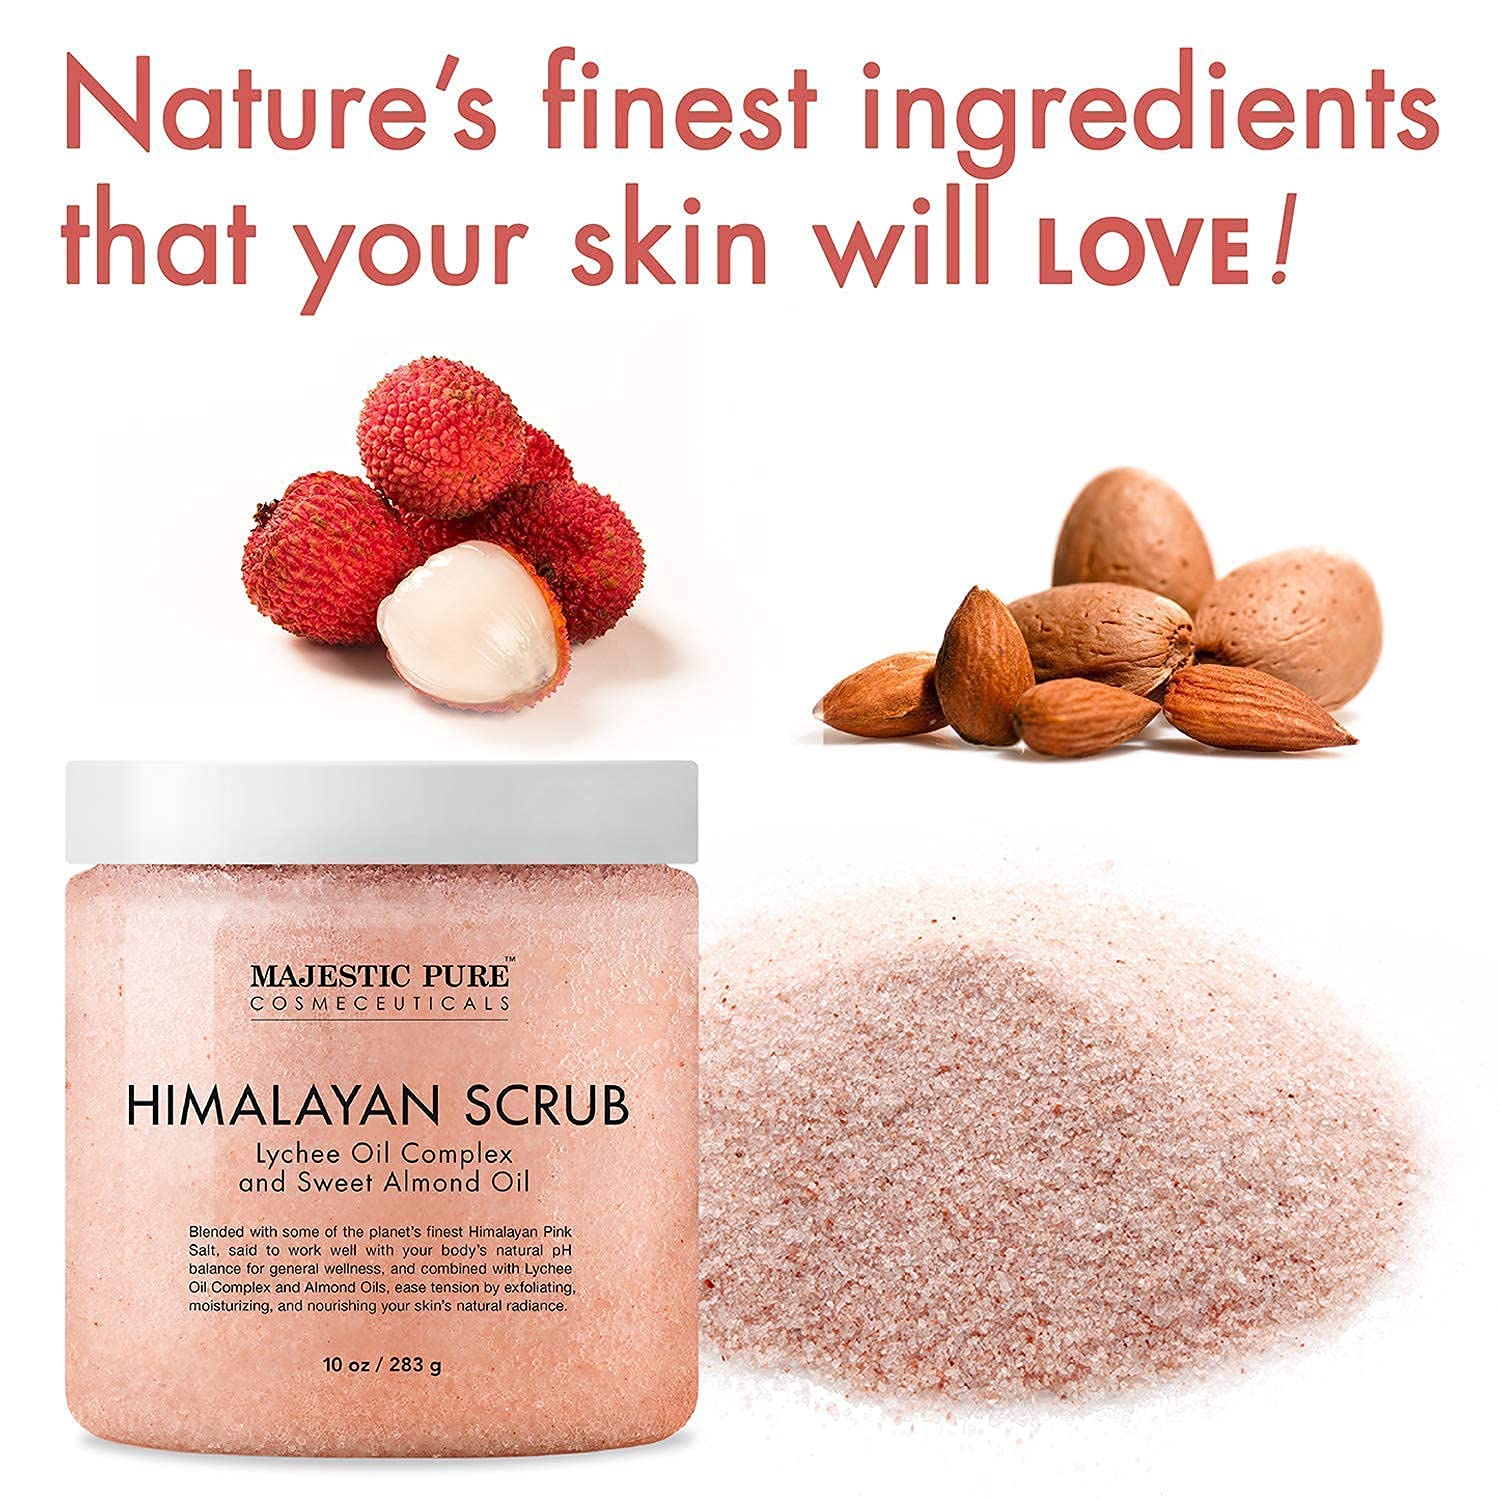 Majestic Pure Himalayan Scrub with Collagen (10 oz) and Himalayan Scrub with Lychee Fragrance (10 oz) Bundle